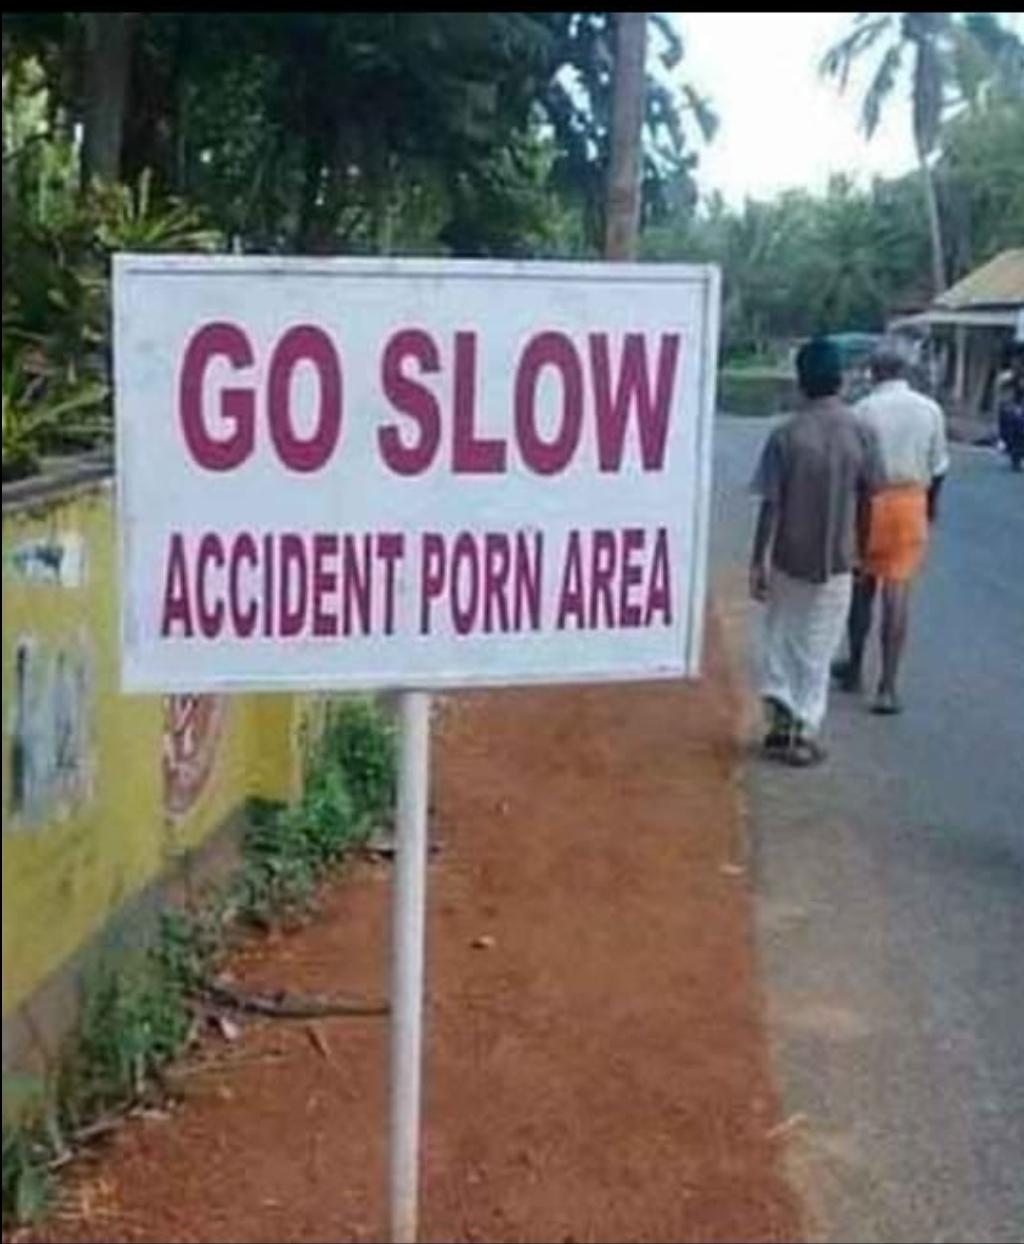 funny things in india - Go Slow Accident Porn Area